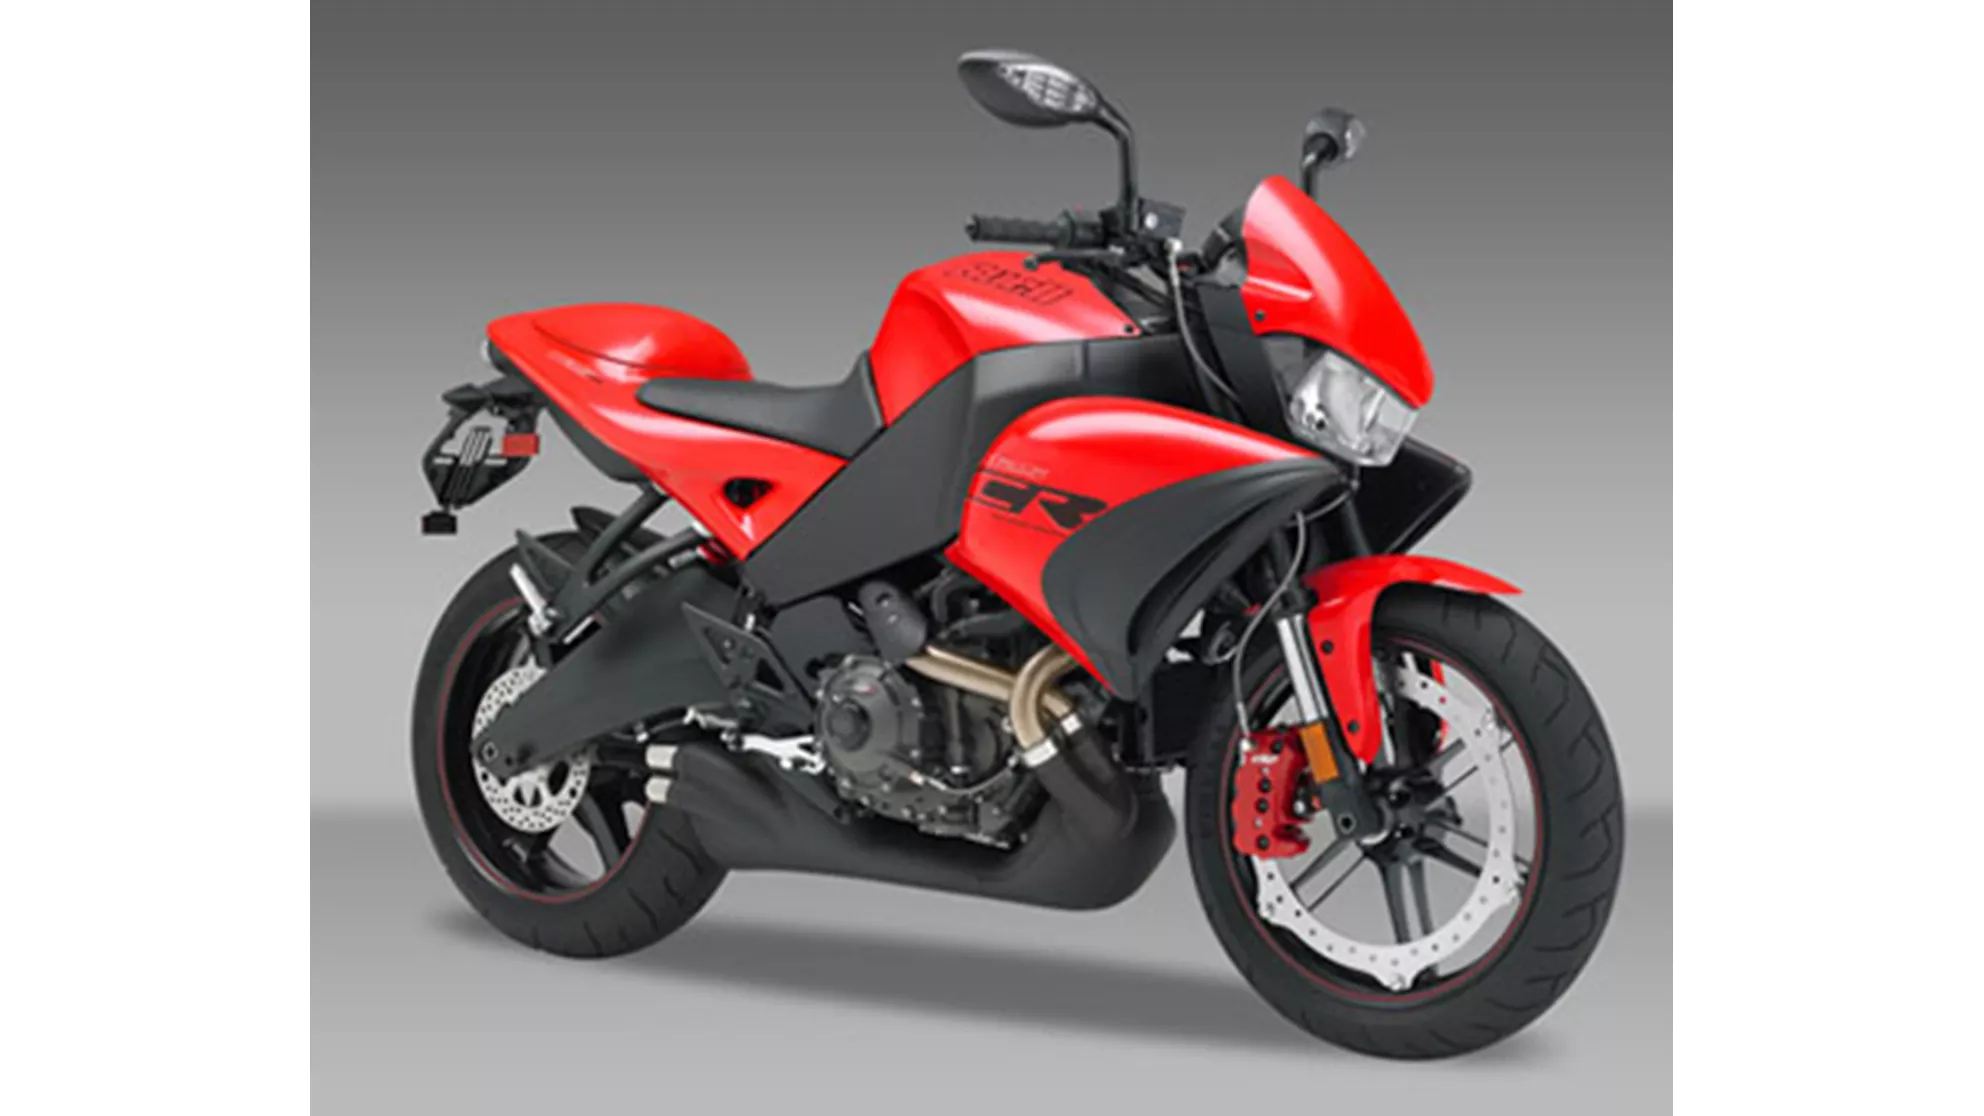 Buell 1125 CR - Image 3